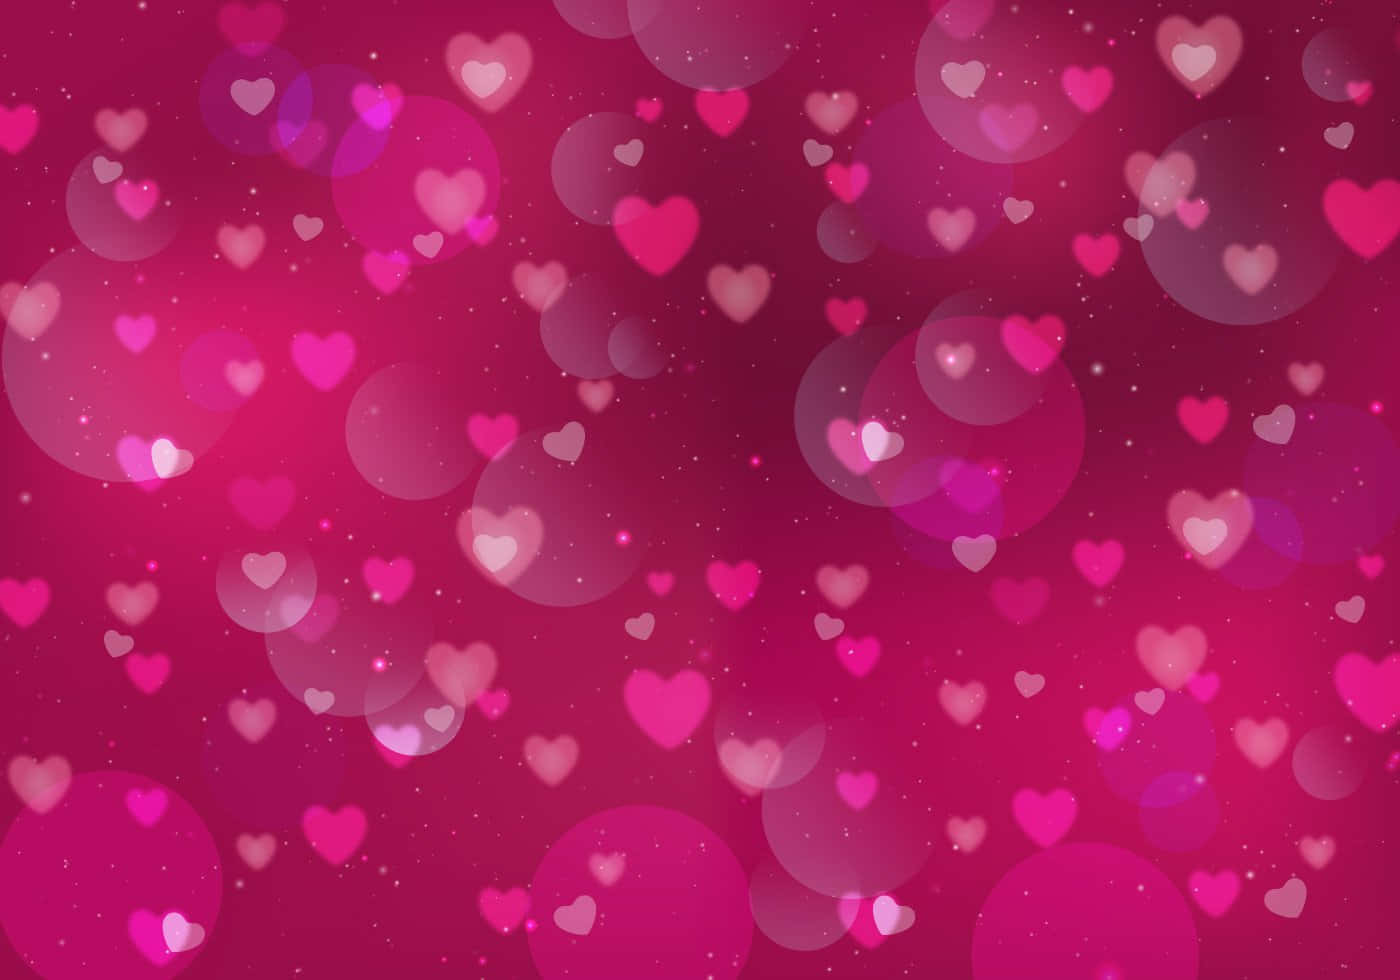 Brighten Your Day with Glittery Pink Hearts! Wallpaper